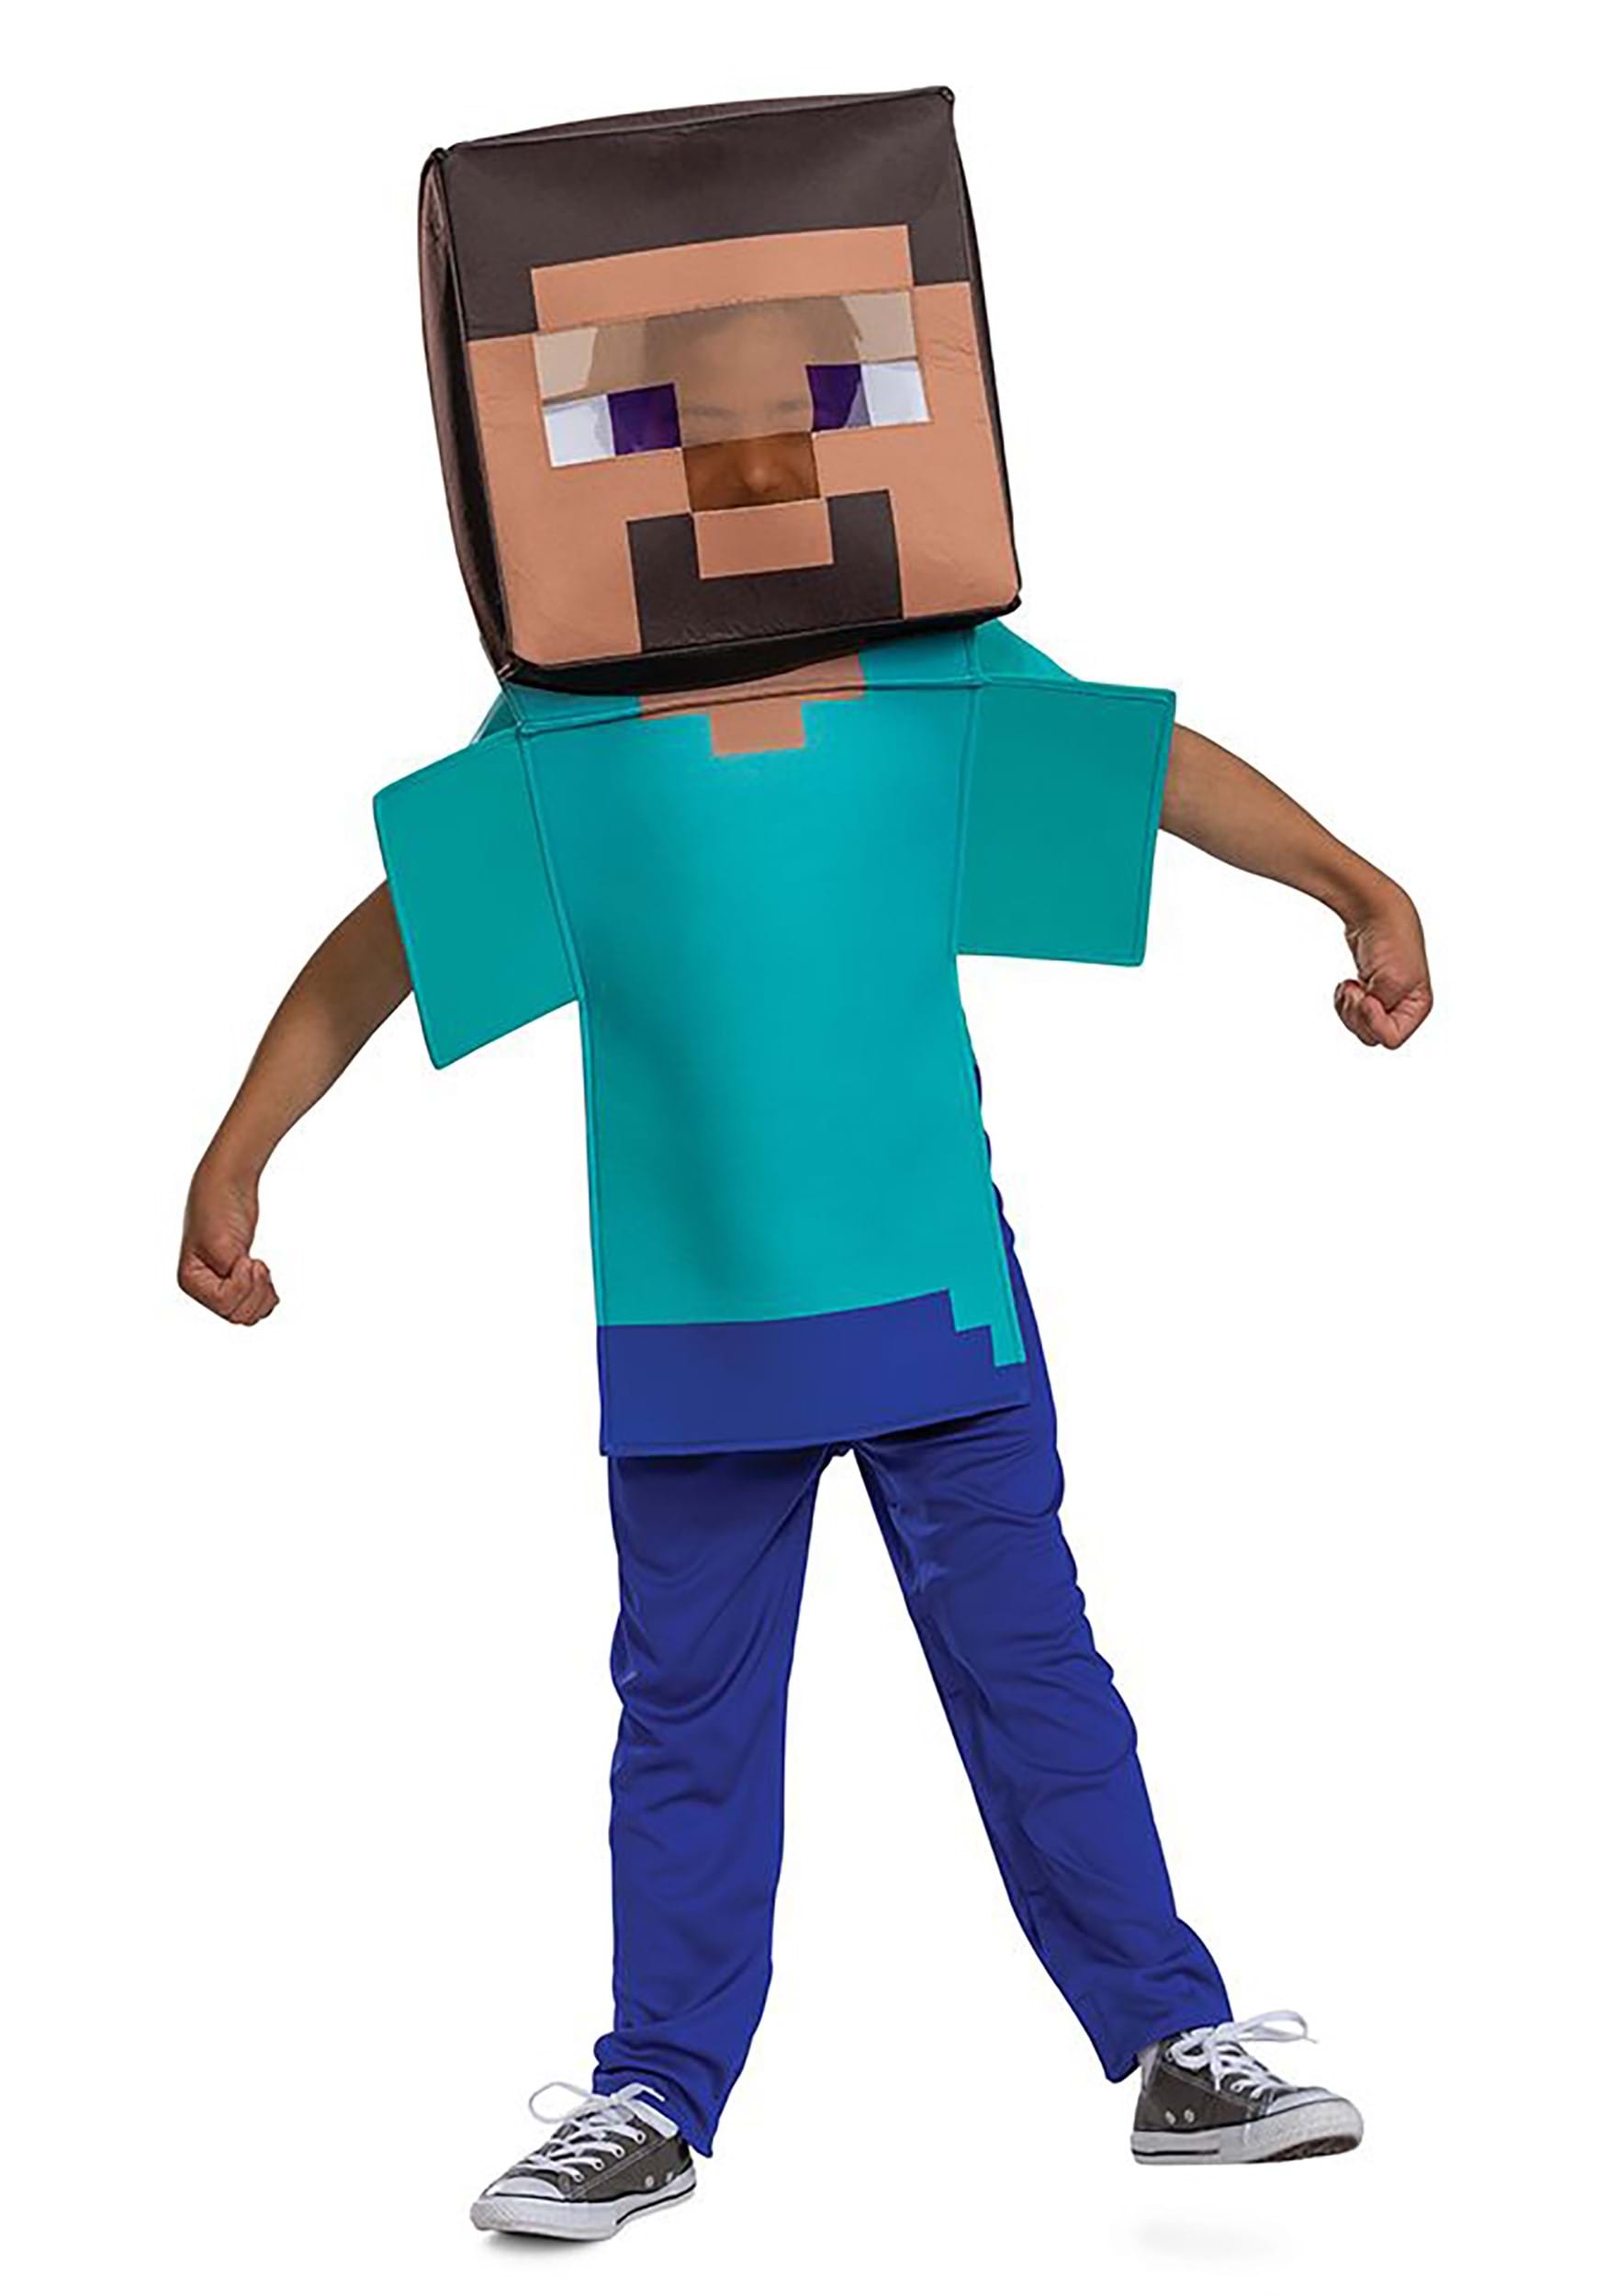 Photos - Fancy Dress Disguise Minecraft Adaptive Steve Costume for Kids Brown/Blue DI120759